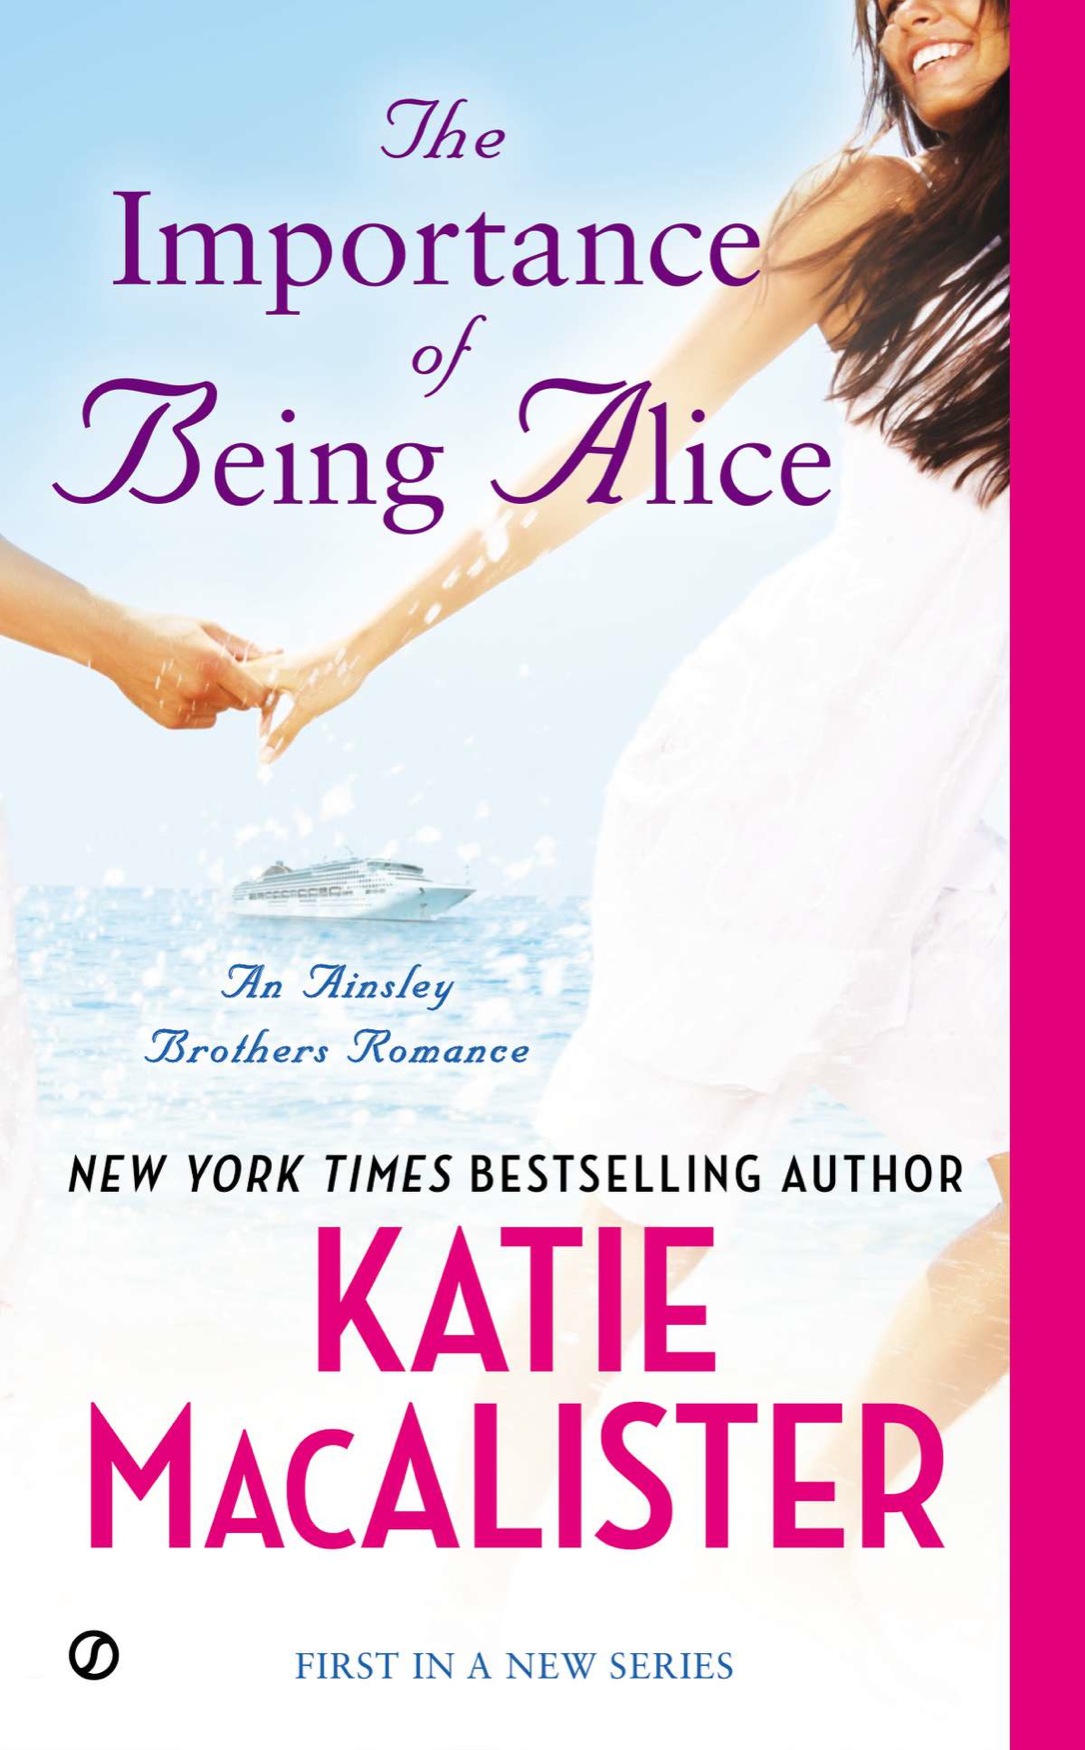 The Importance of Being Alice (2014) by Katie MacAlister